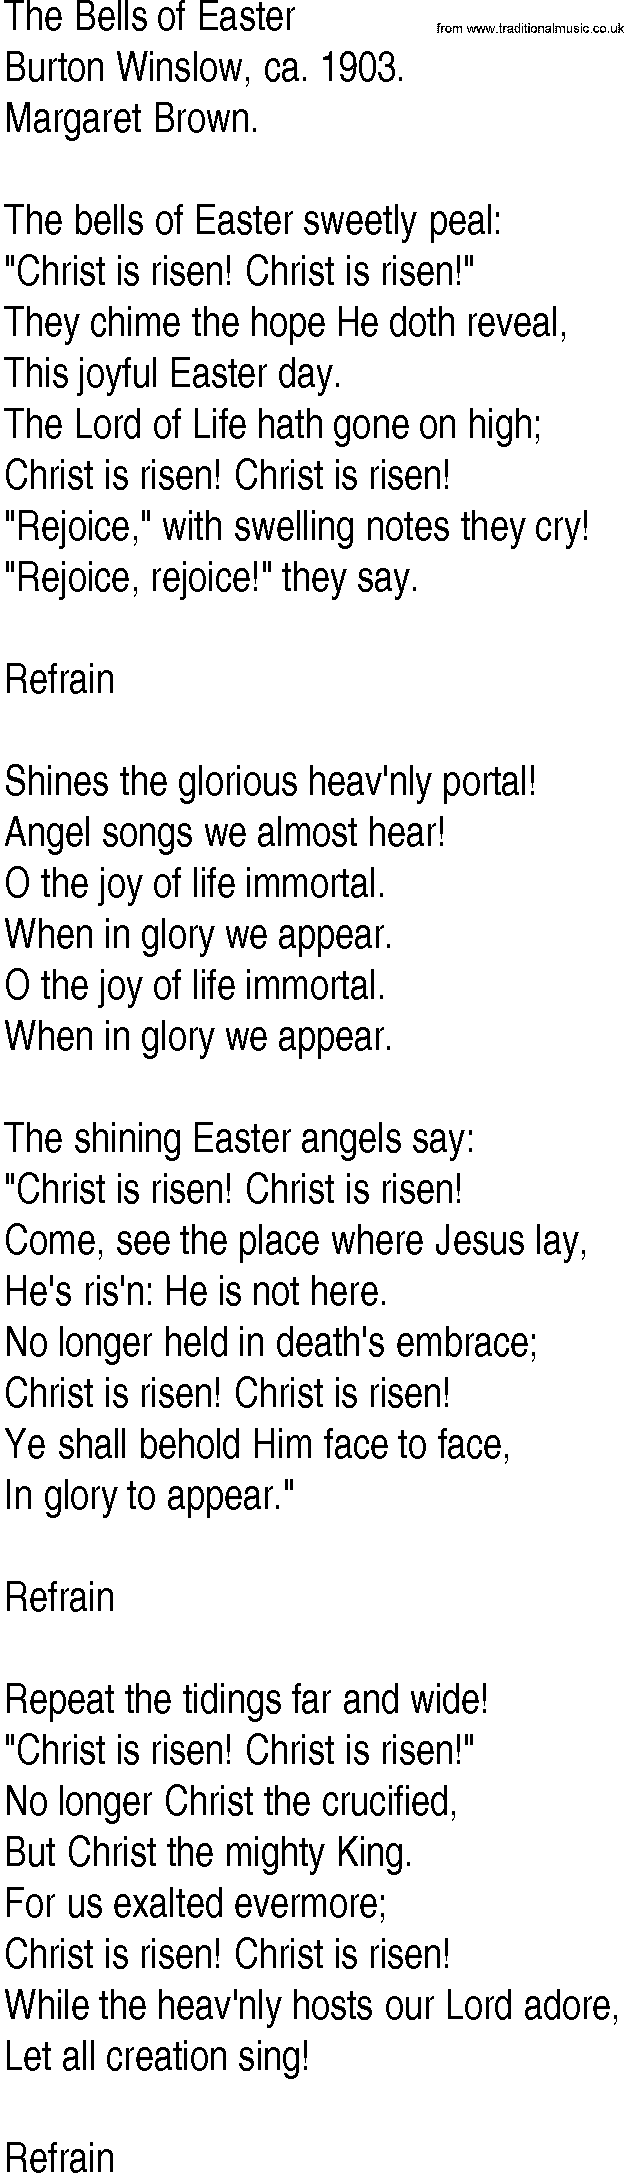 Hymn and Gospel Song: The Bells of Easter by Burton Winslow ca lyrics